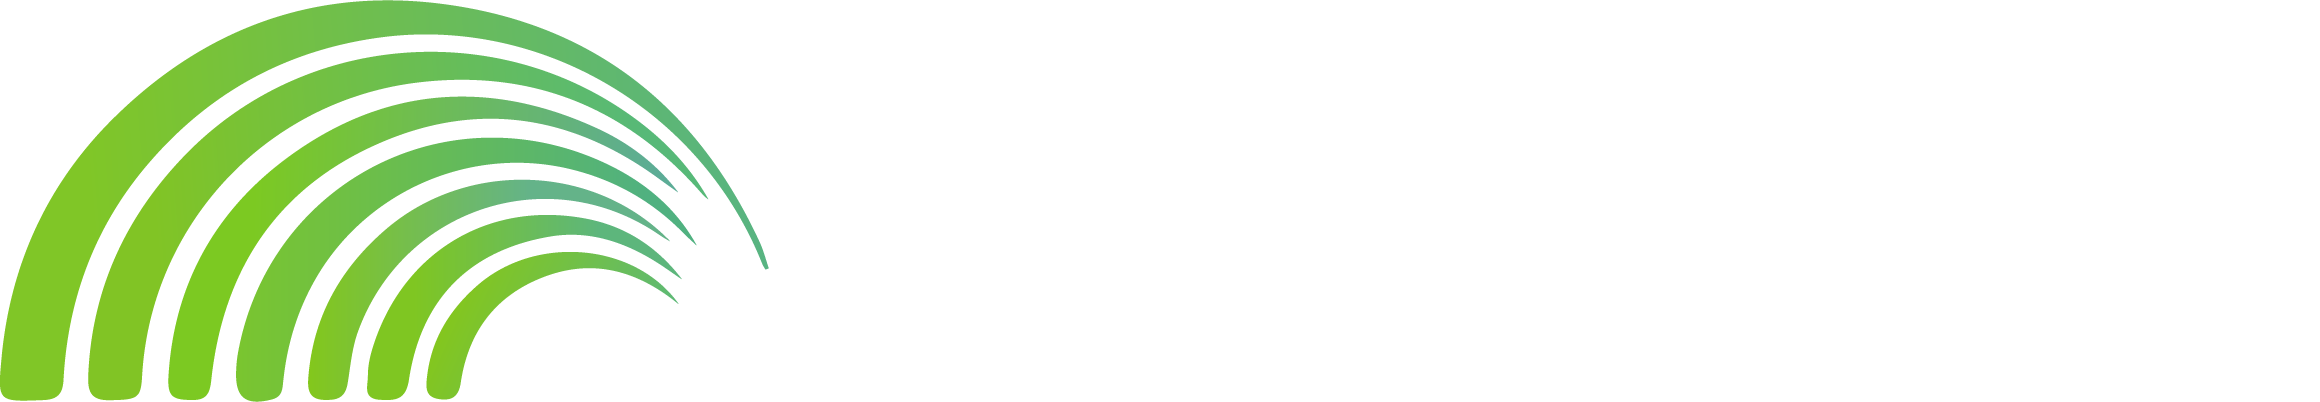 eaccounting firm